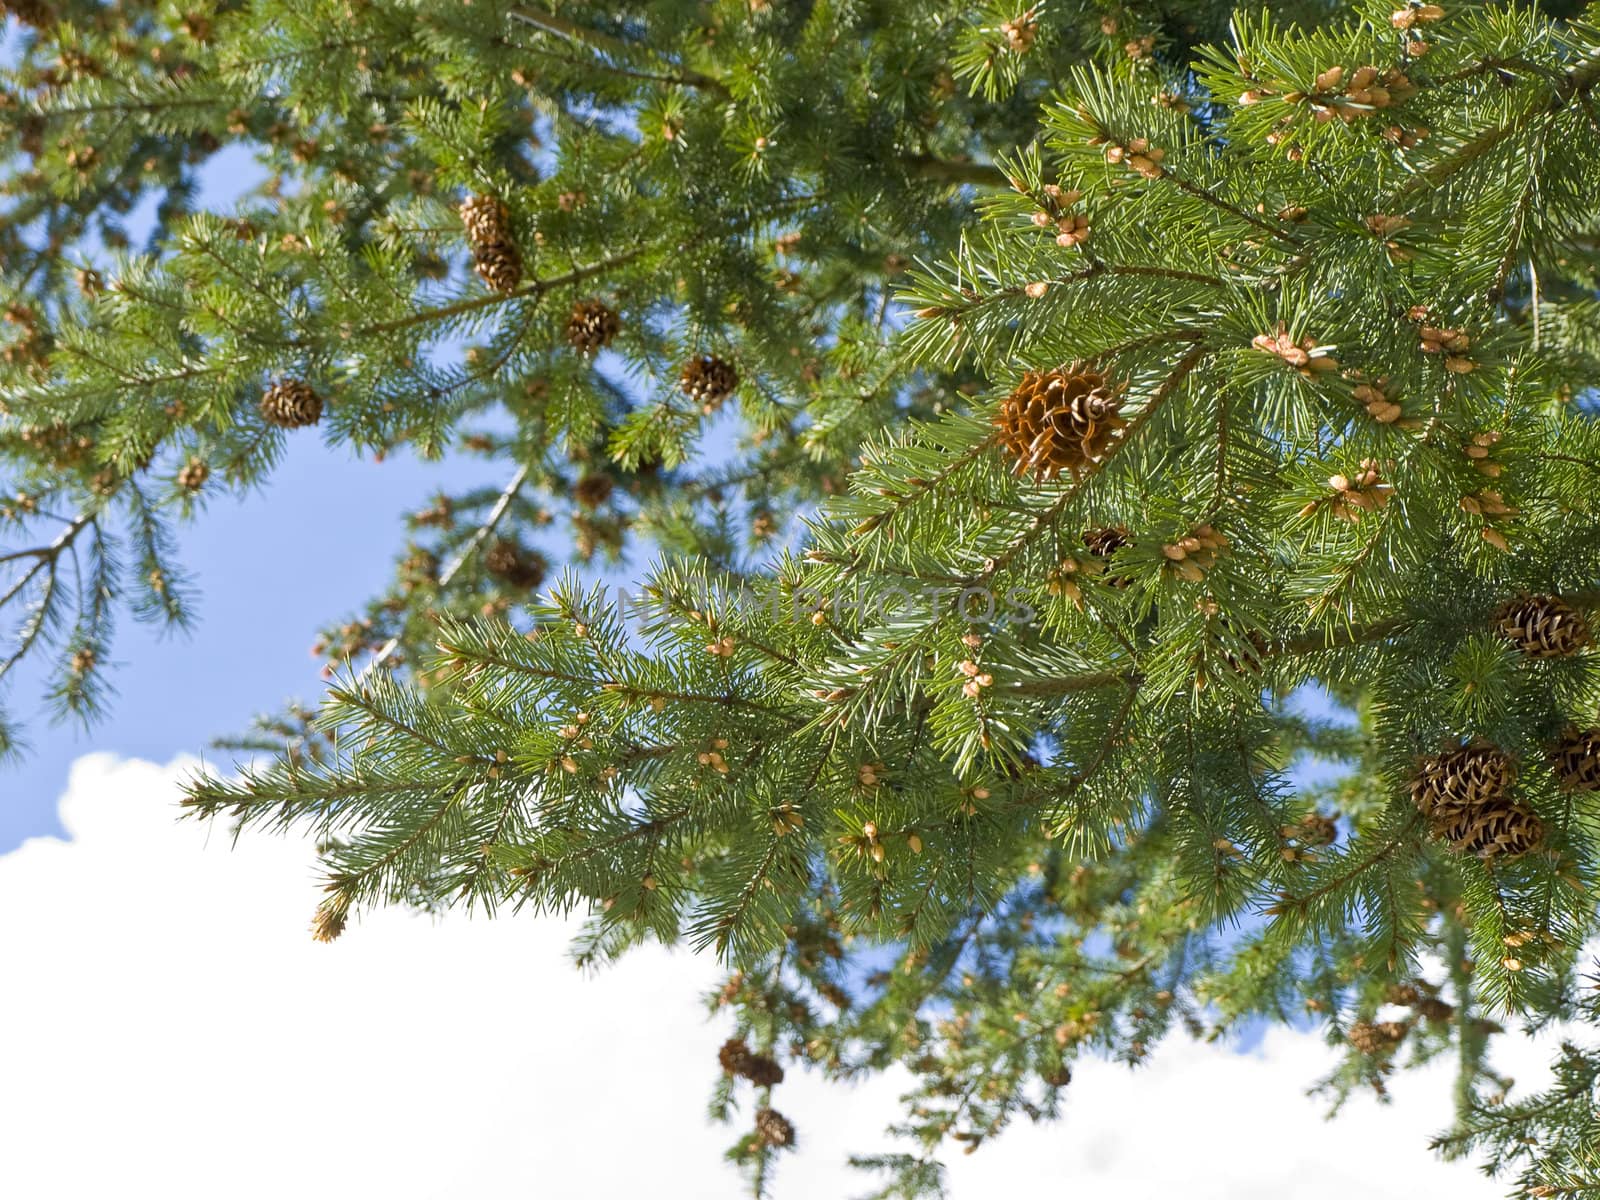 Branches of the pine tree with new strobiles against the blue sky